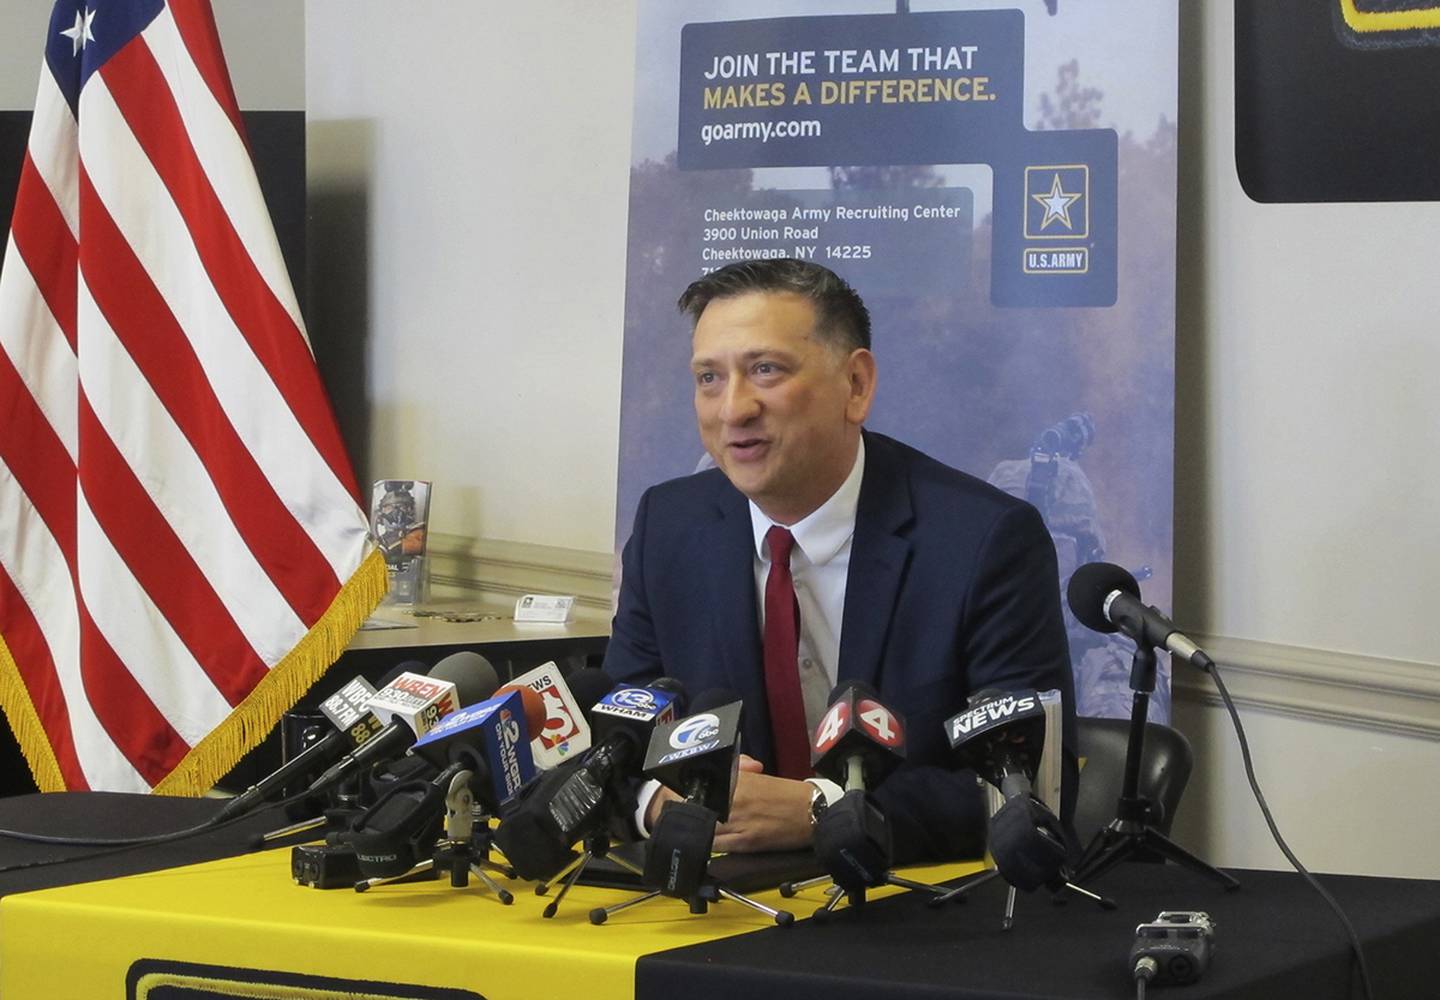 Staff Sgt. David Bellavia, of Lyndonville, N.Y., speaks at a news conference at an Army recruiting station in Cheektowaga, N.Y., Tuesday, June 11, 2019.